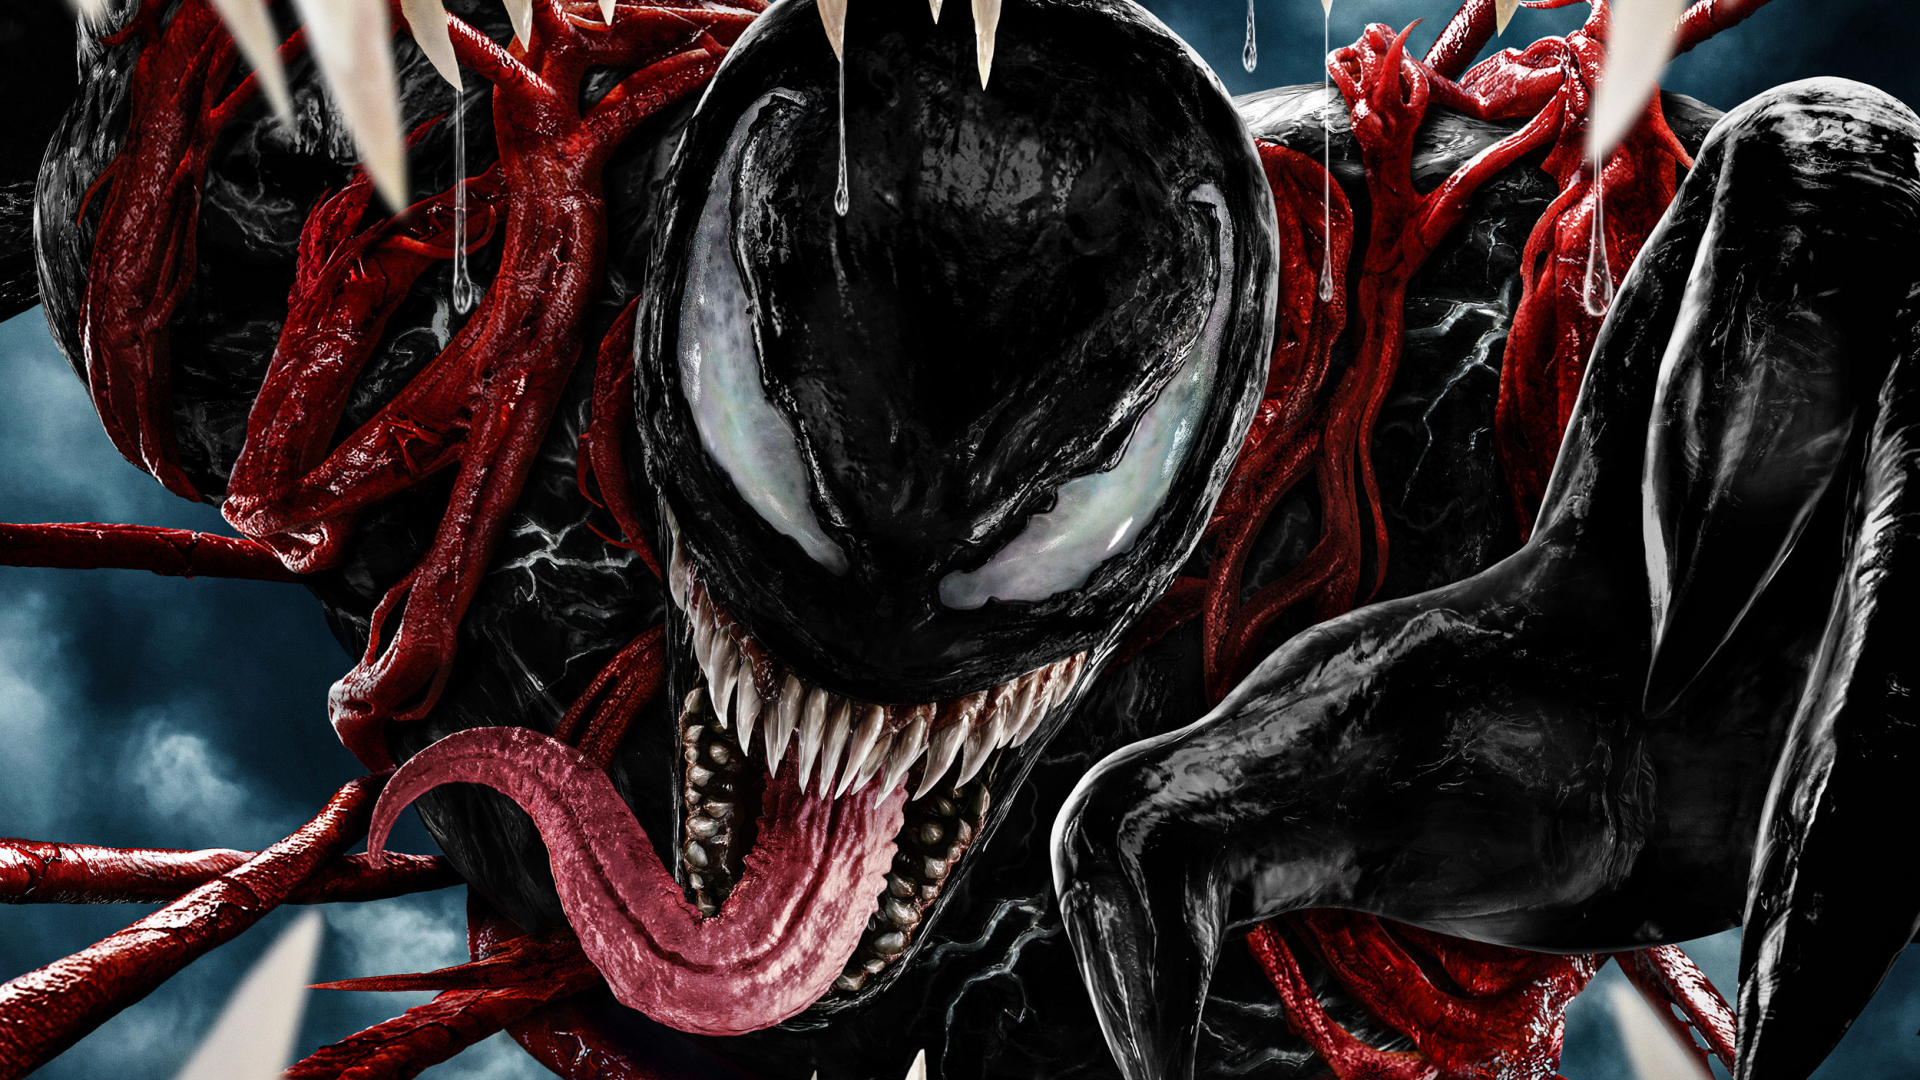 What Apps Is Venom Let There Be Carnage On 1920x1080 Venom Let There Be Carnage 1080P Laptop Full HD Wallpaper, HD